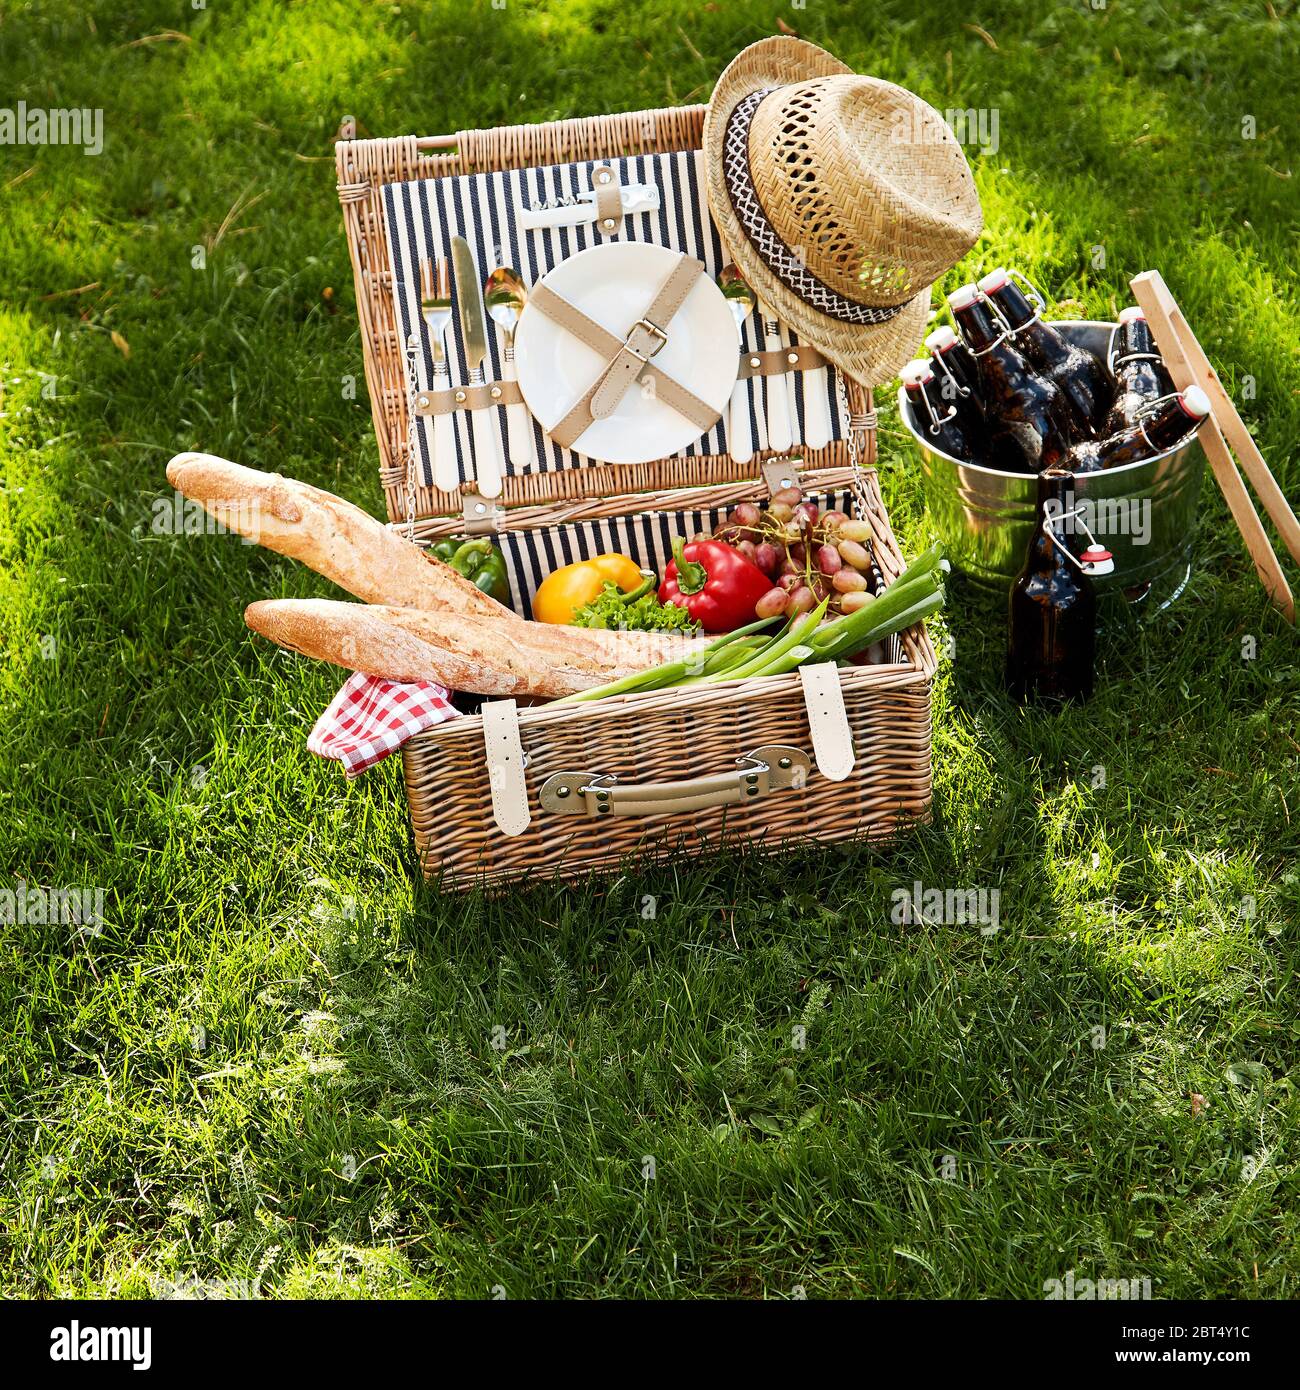 Healthy vegetarian summer picnic hamper with assorted fresh vegetables, French baguettes and grapes alongside a silver wine cooler filled with bottles Stock Photo